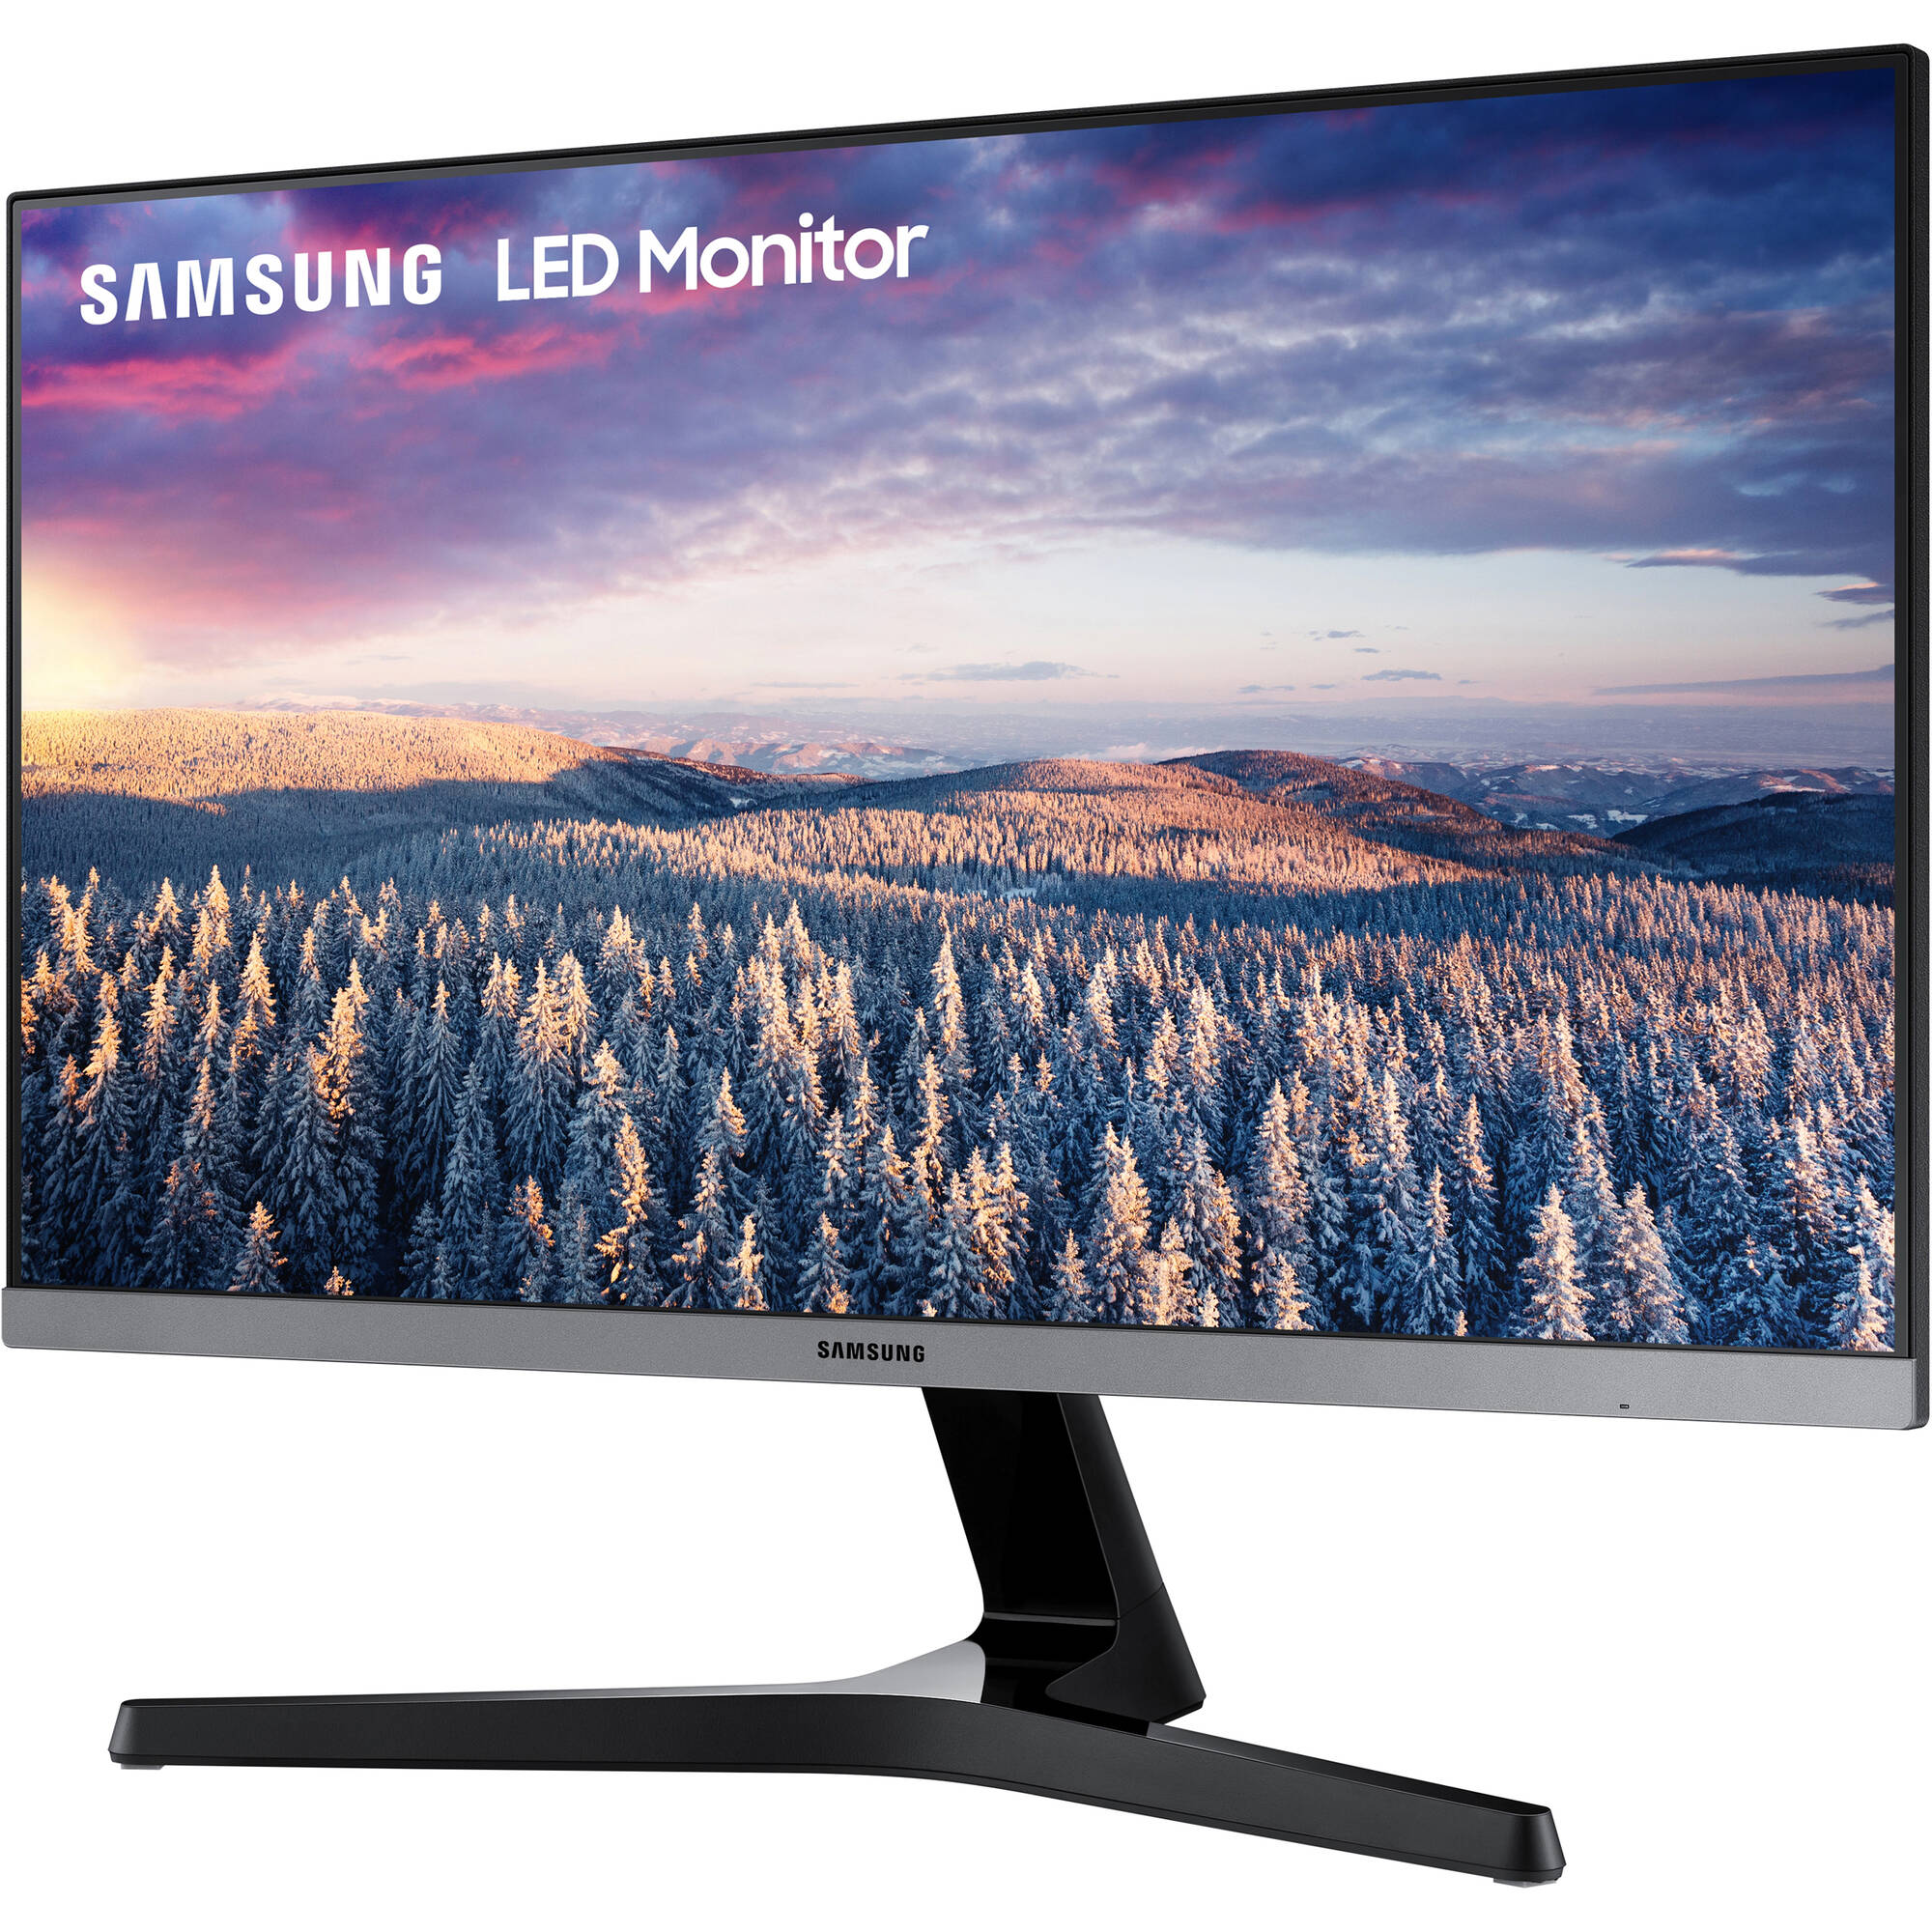 Samsung LS22R350FHNXZA-RB 22" 1920 x 1080 75Hz LED Business Monitor - Certified Refurbished